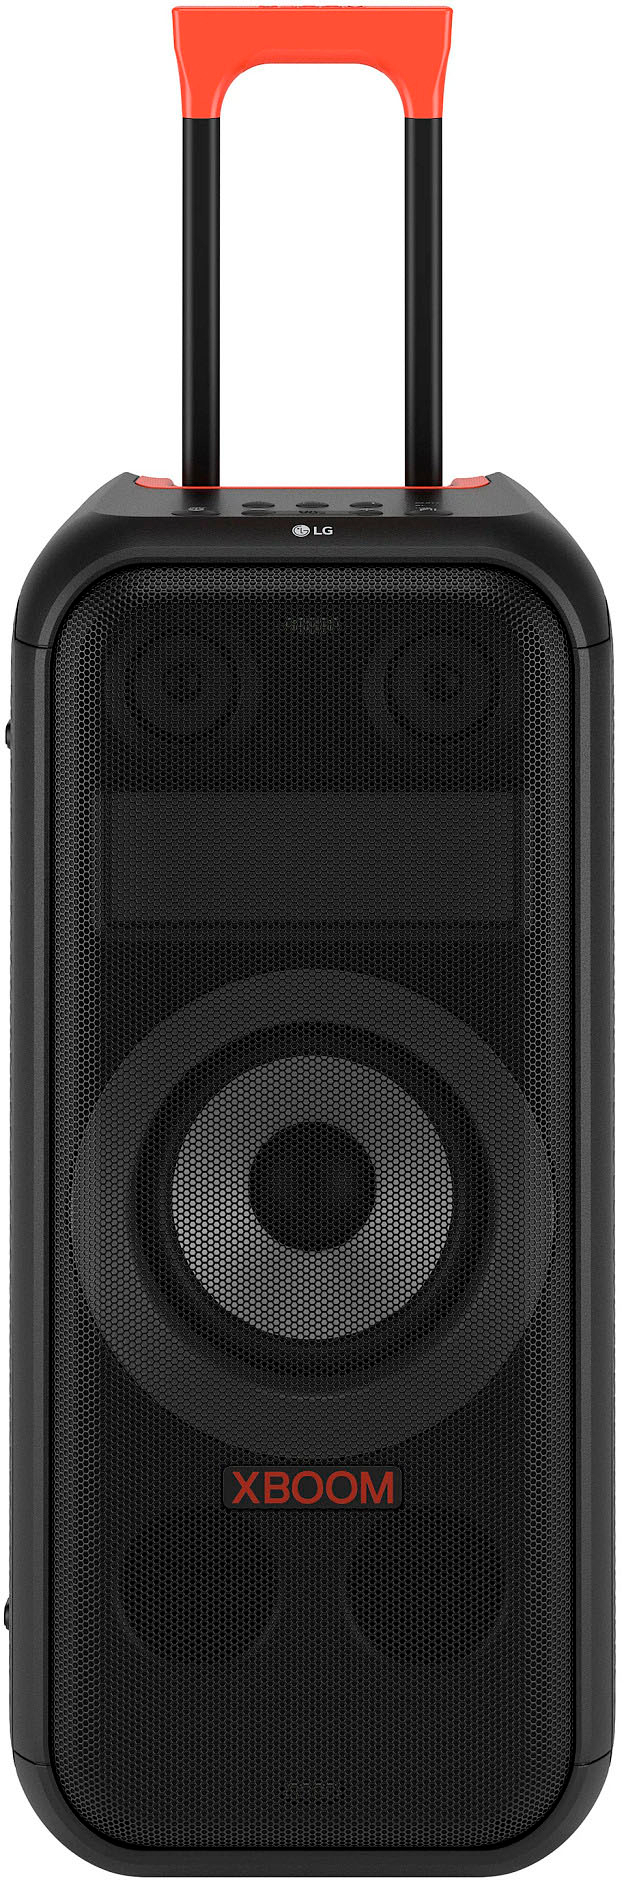 LG Tower with LED Black Party XL7 Speaker XL7S - Buy Portable Pixel Best XBOOM